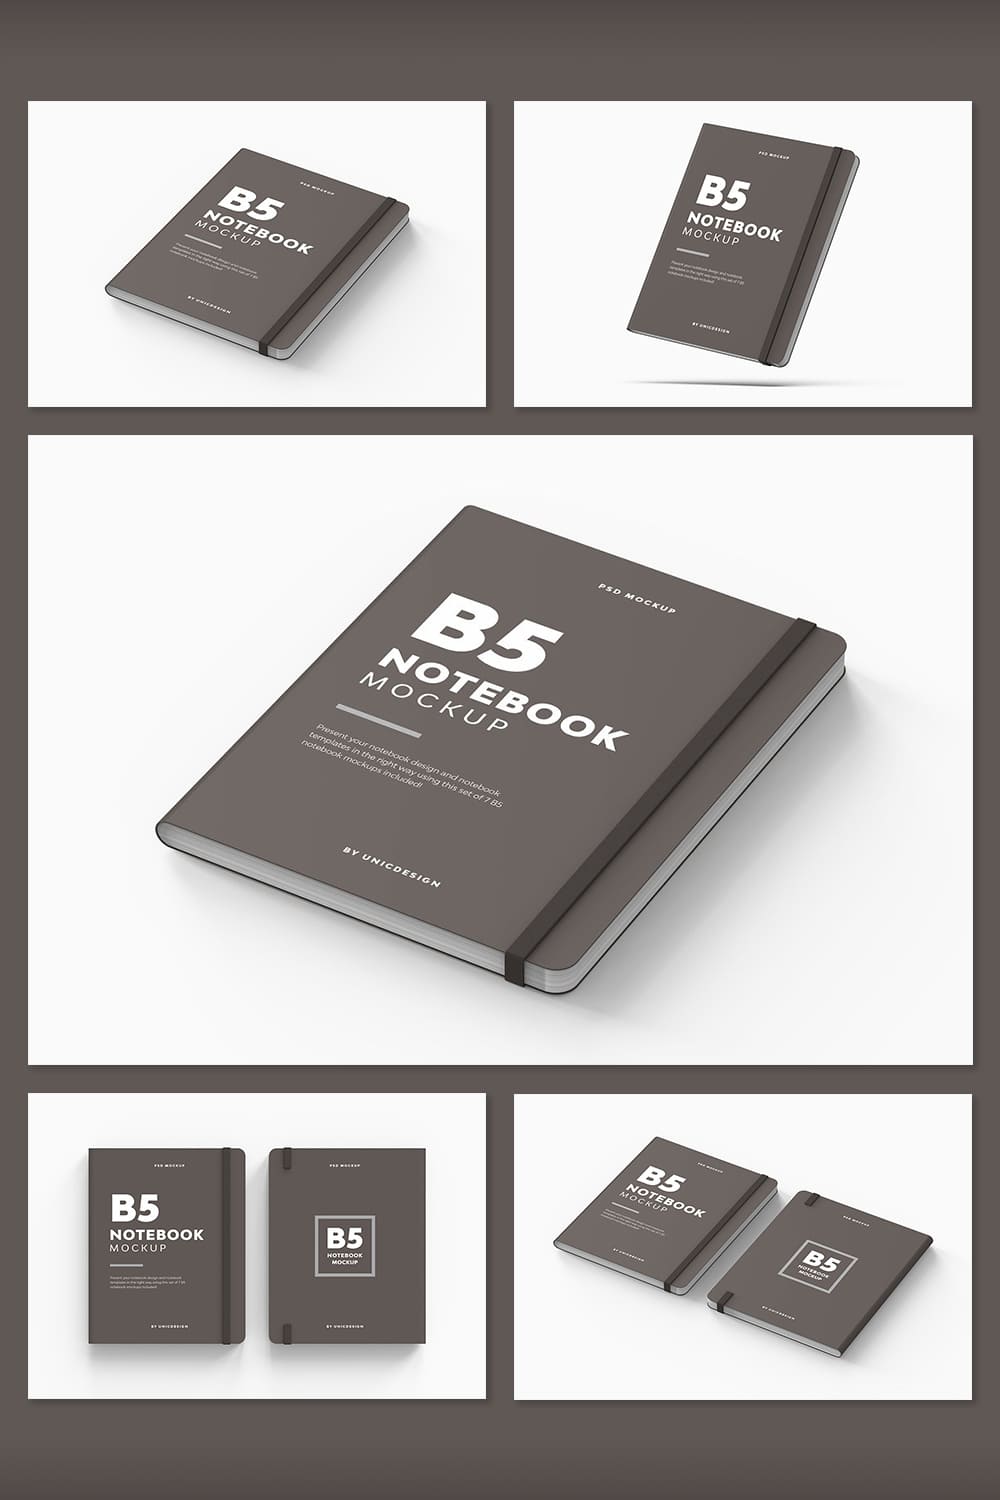 A selection of images of b5 notebook with a wonderful design.